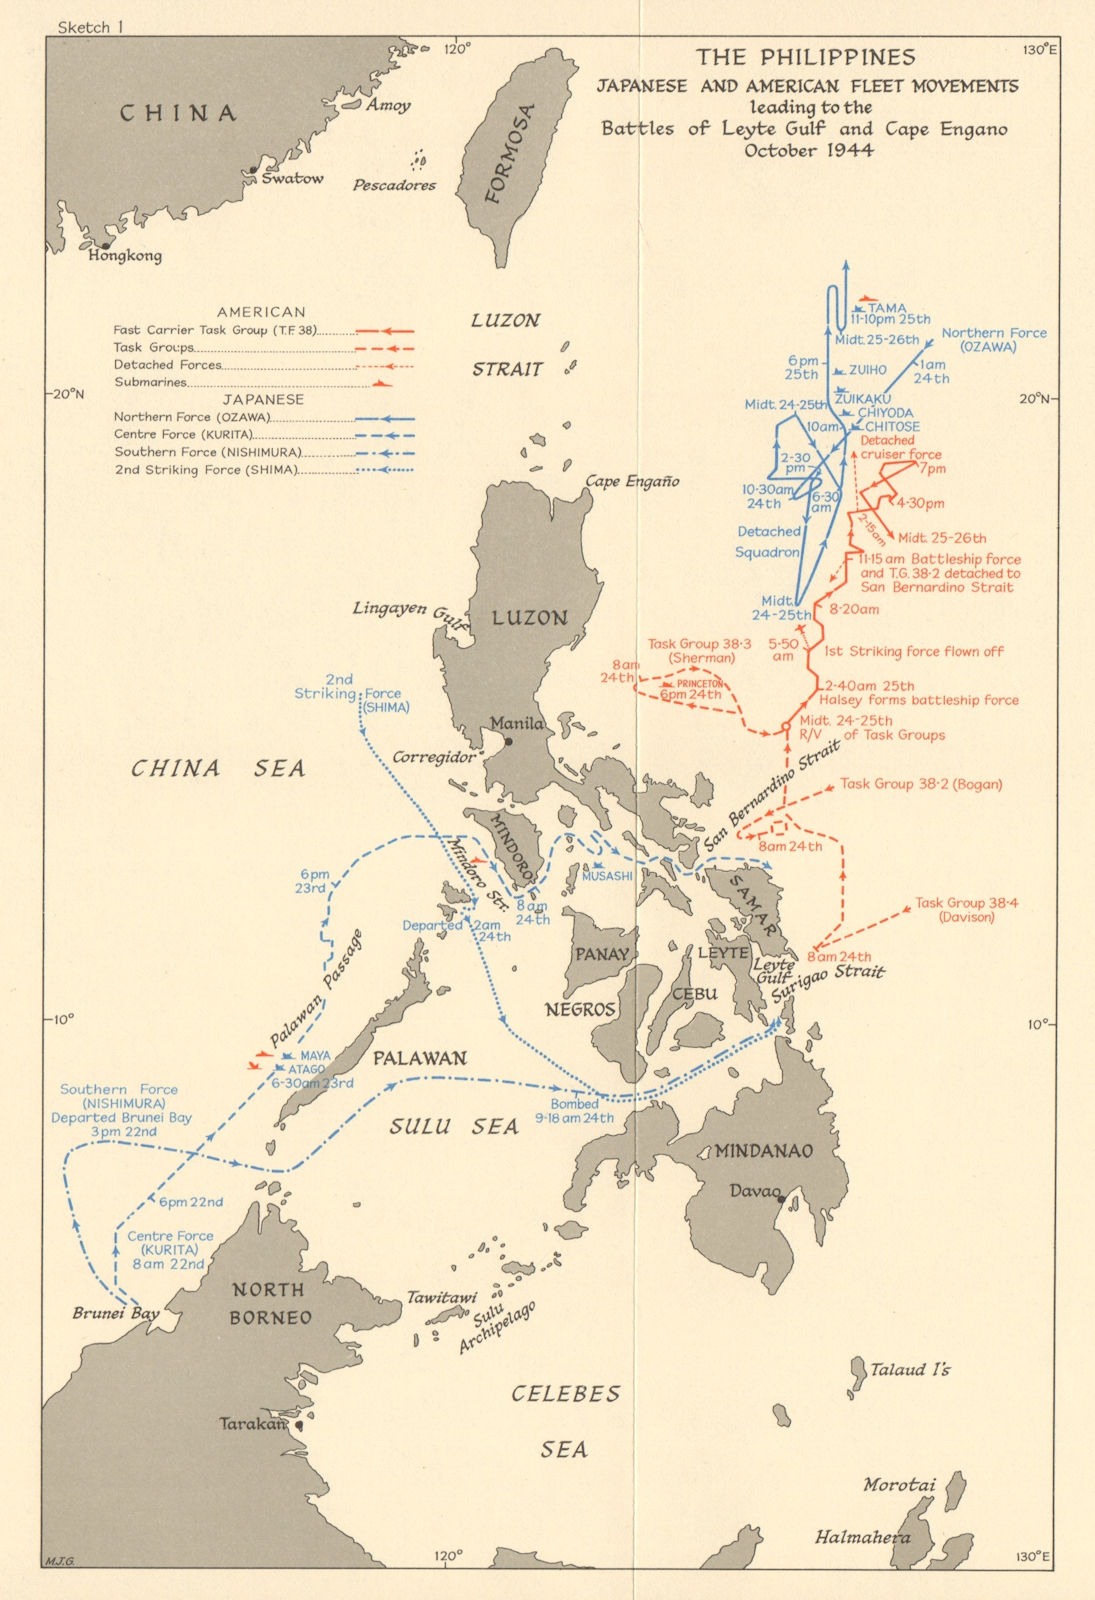 Philippines Fleet Movements 1944 Battles Of Leyte Gulf And Cape Engano